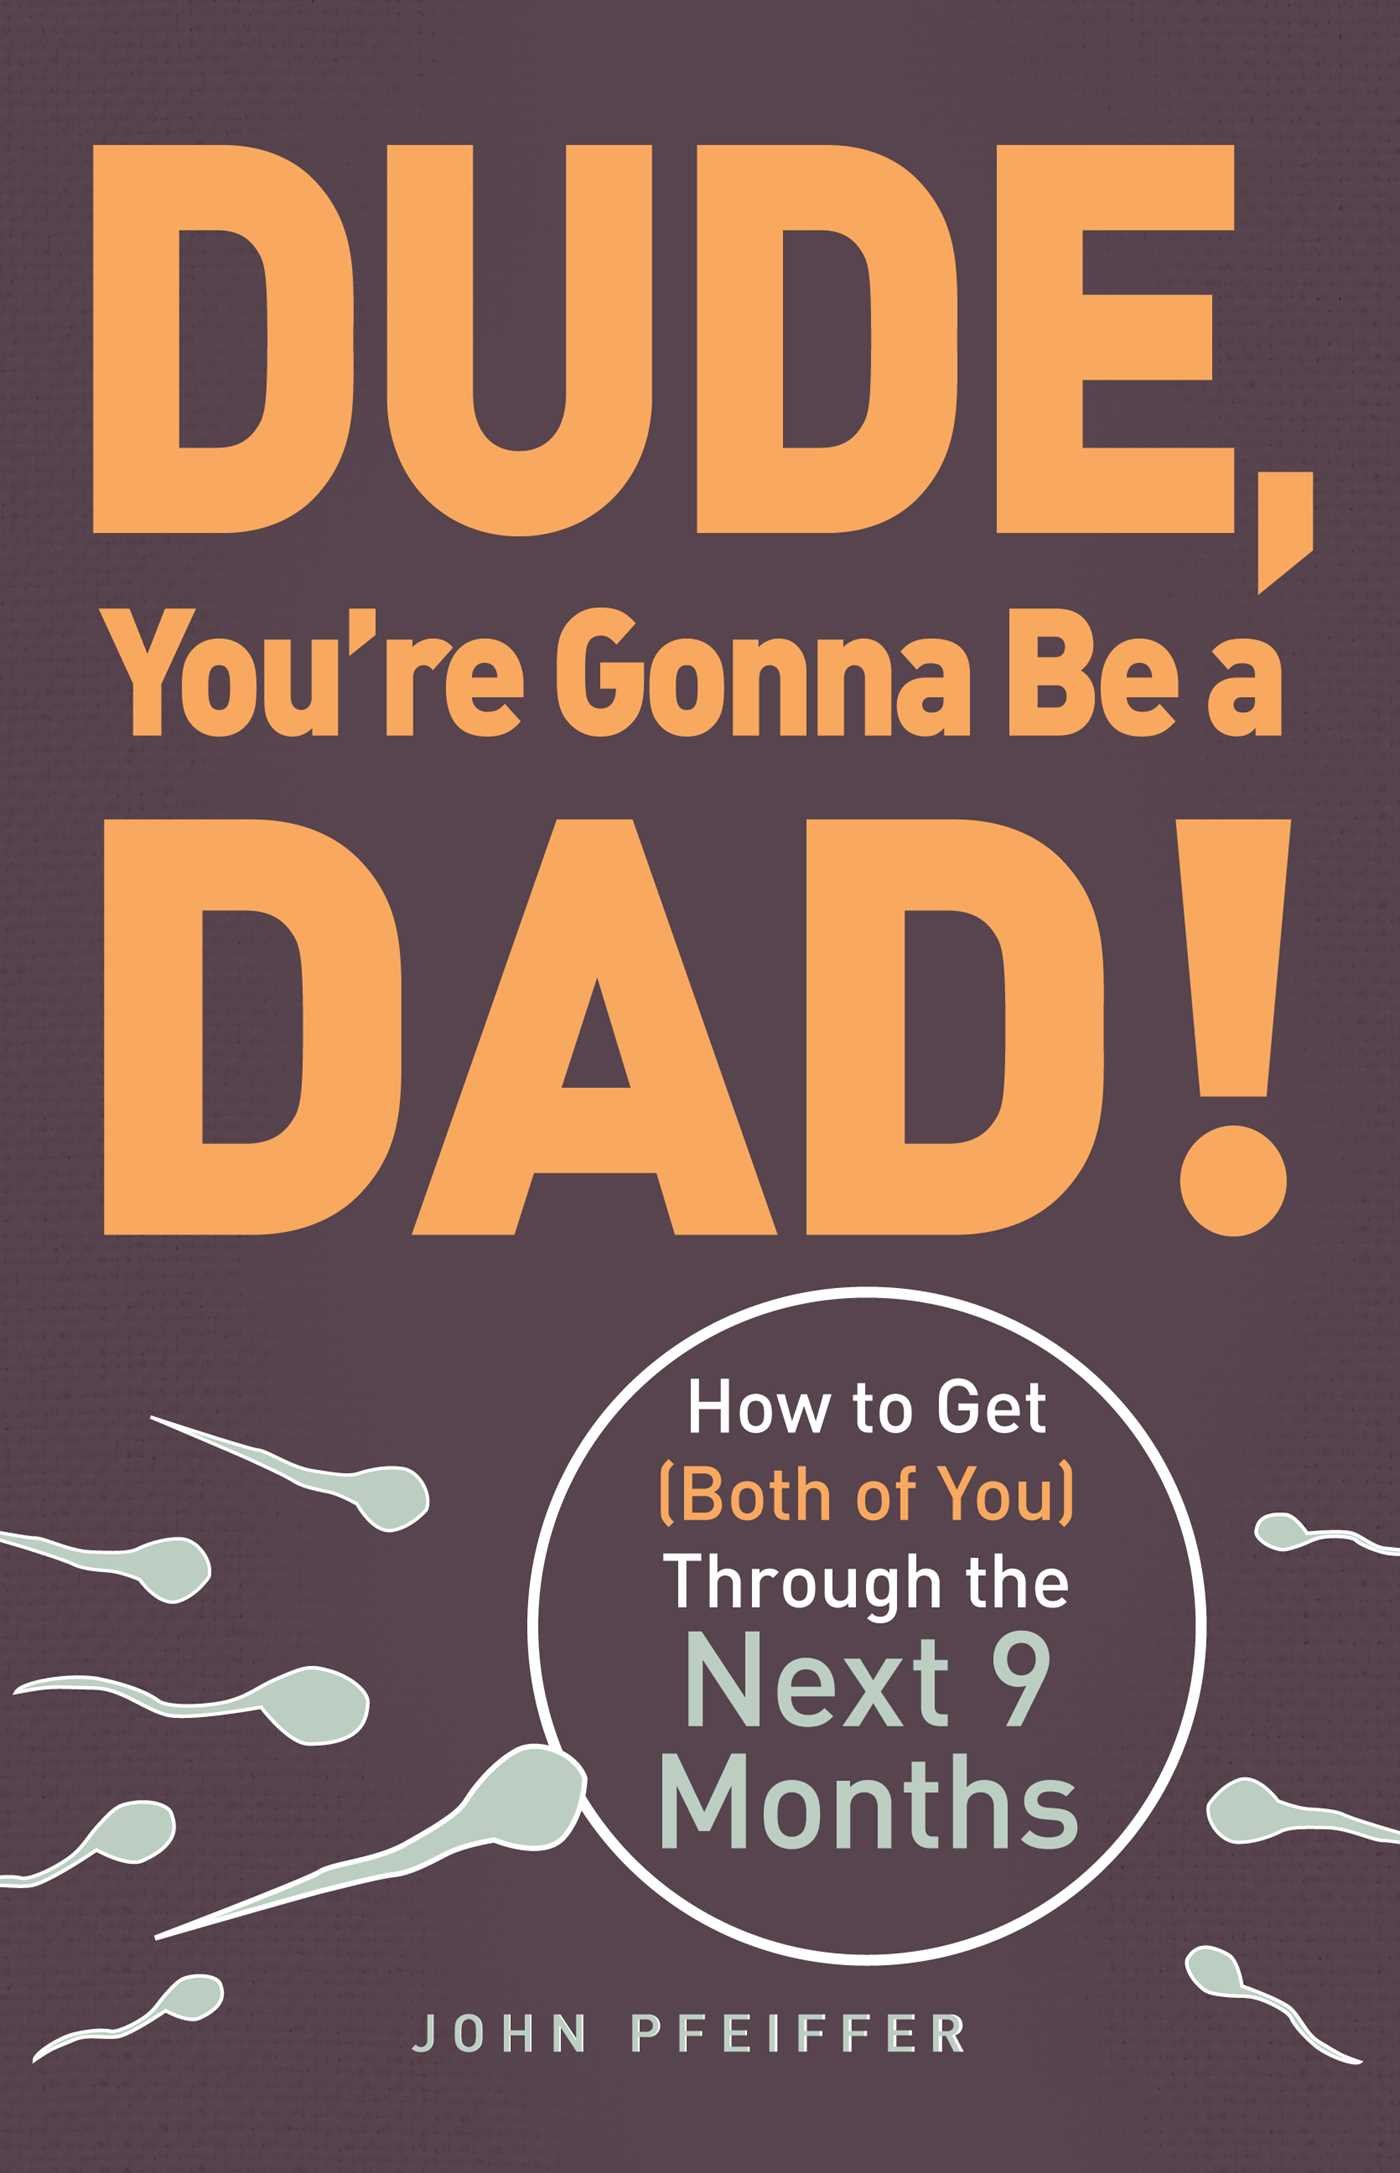 "Dude, You're Gonna Be a Dad!" by John Pfeiffer